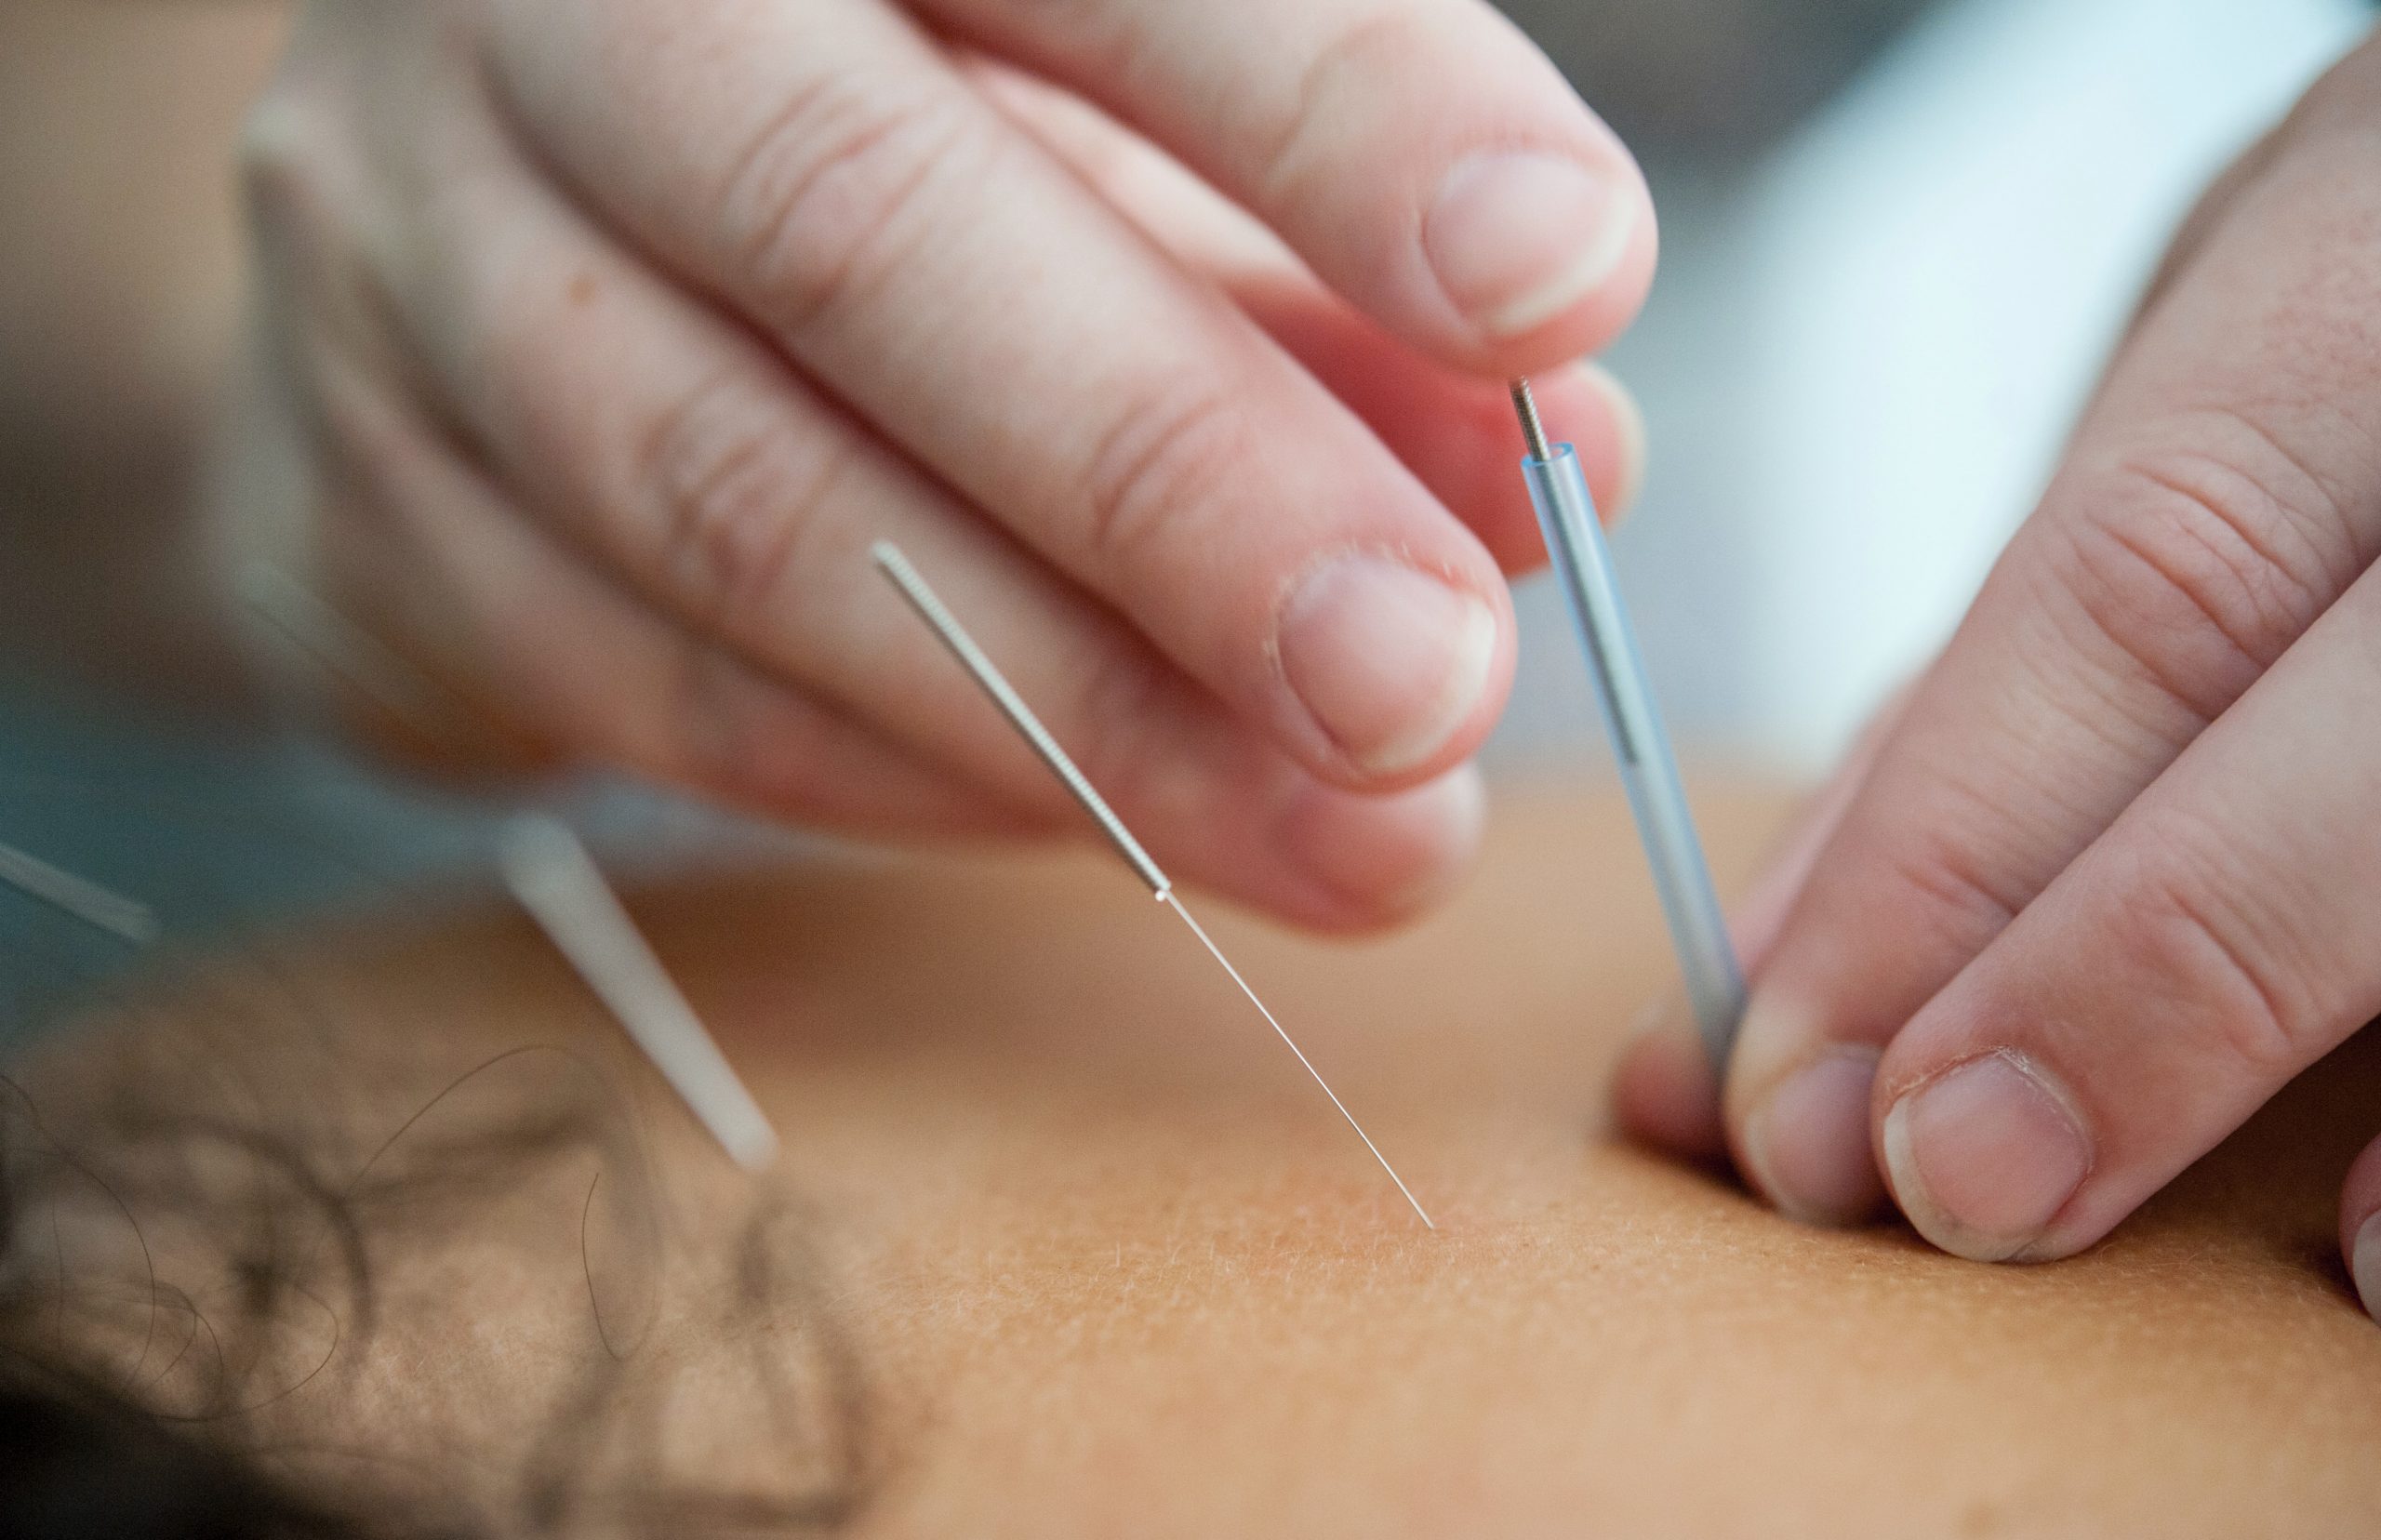 Western Professional Medical Acupuncture Prices Within A Physical Remedy Treatment Programme